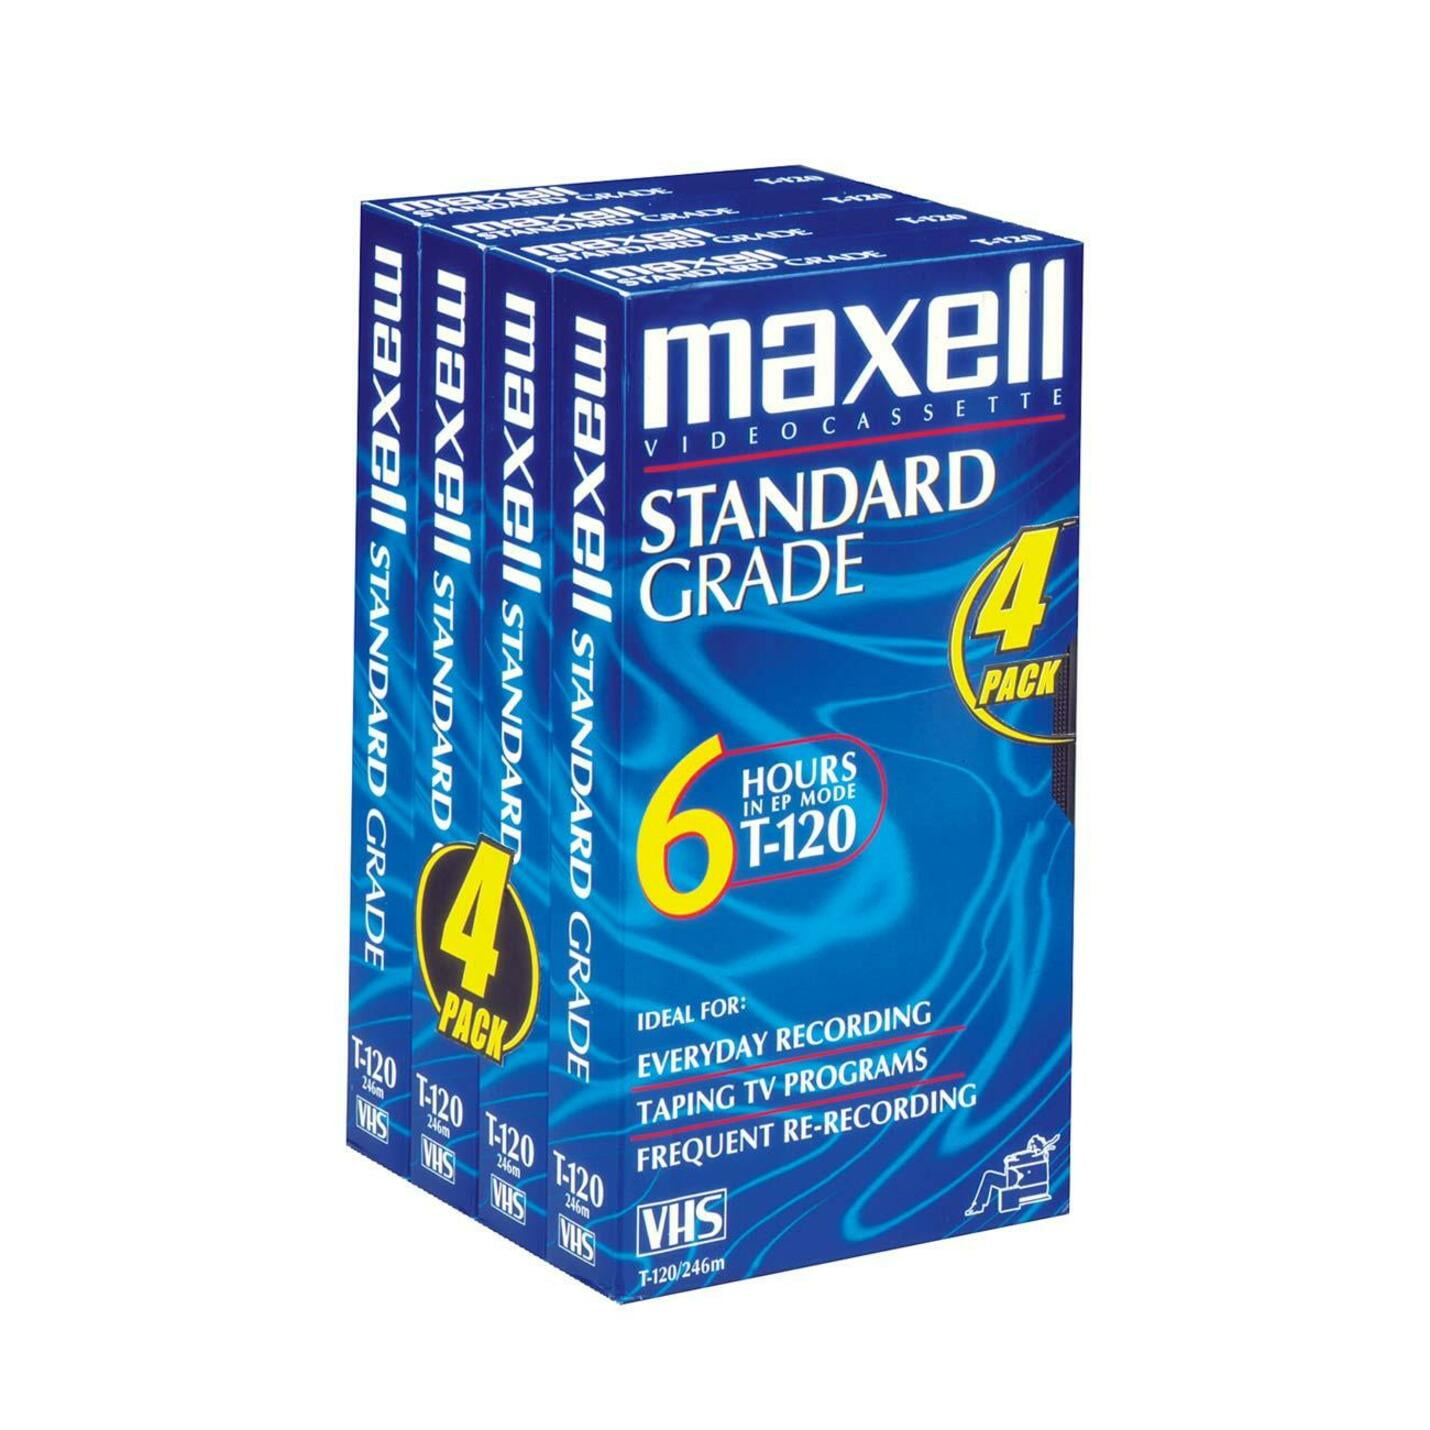 New Maxell Premium High Grade Videocassettes 120 Minutes 4 Pack Recording Time Outstanding Picture 